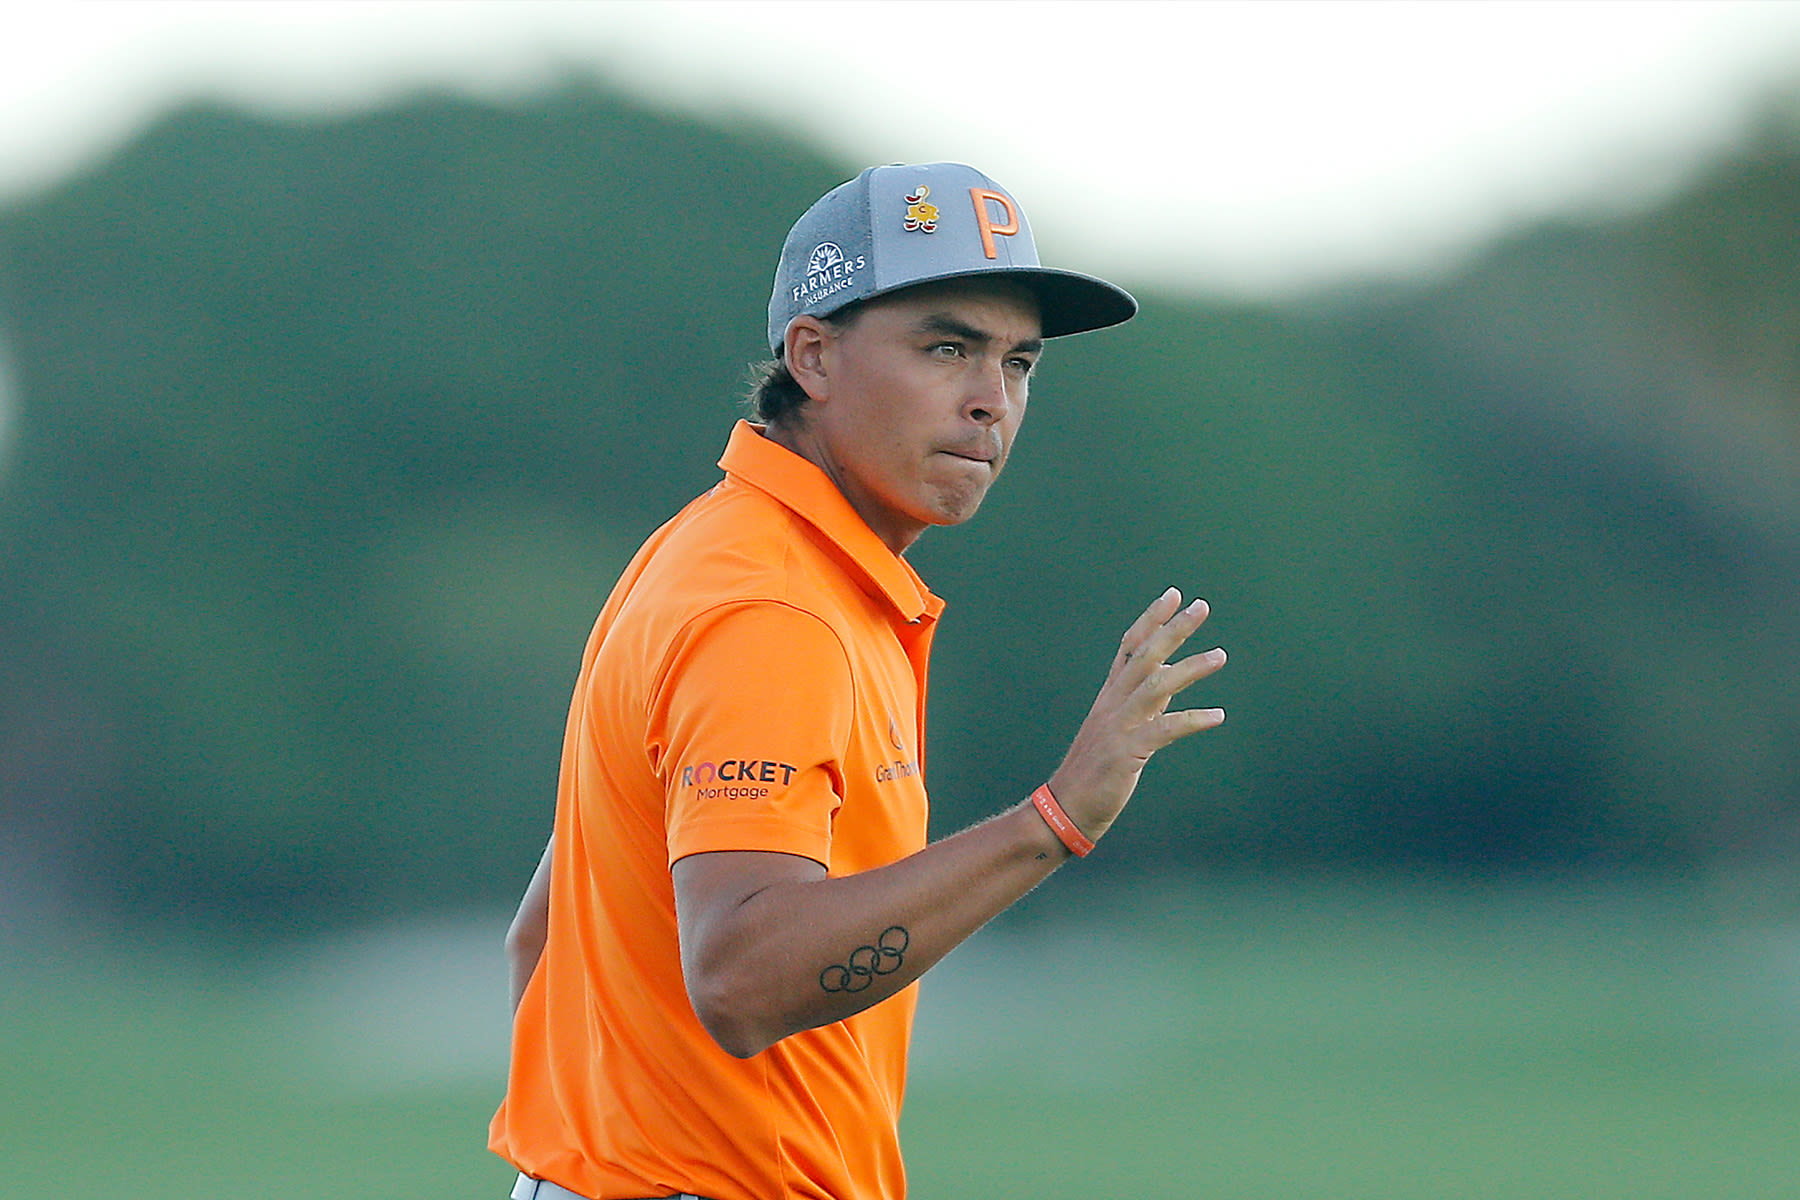 PALM BEACH GARDENS, FLORIDA - MARCH 03: Rickie Fowler reacts after a birdie putt on the 18th hole during the final round of the Honda Classic at PGA National Resort and Spa on March 03, 2019 in Palm Beach Gardens, Florida. (Photo by Michael Reaves/Getty Images)